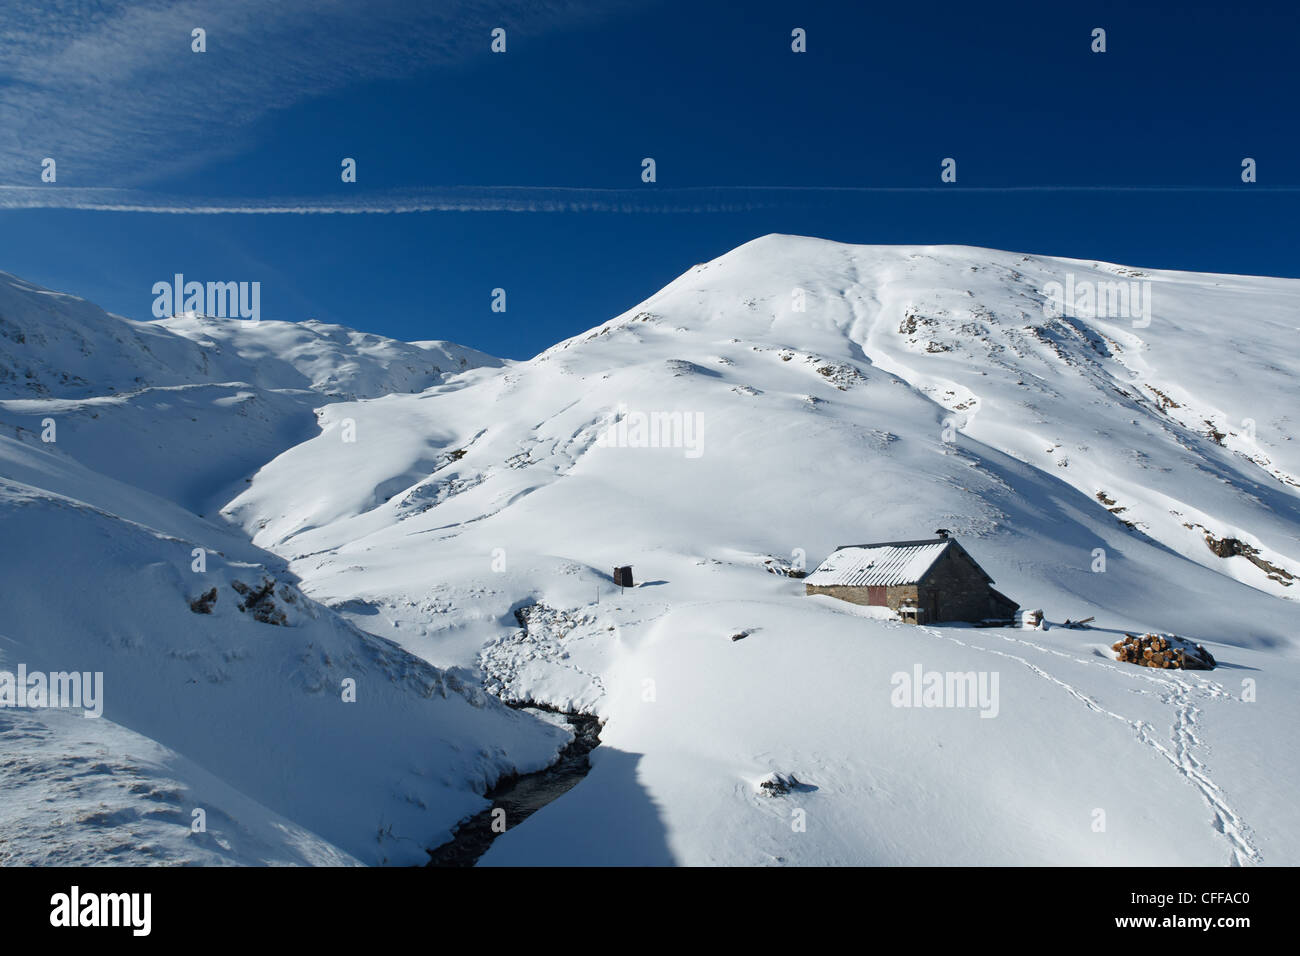 Mountain shelter in snowy mountain landscape near Col de Pause, Ariege, Pyrenees, France. Stock Photo